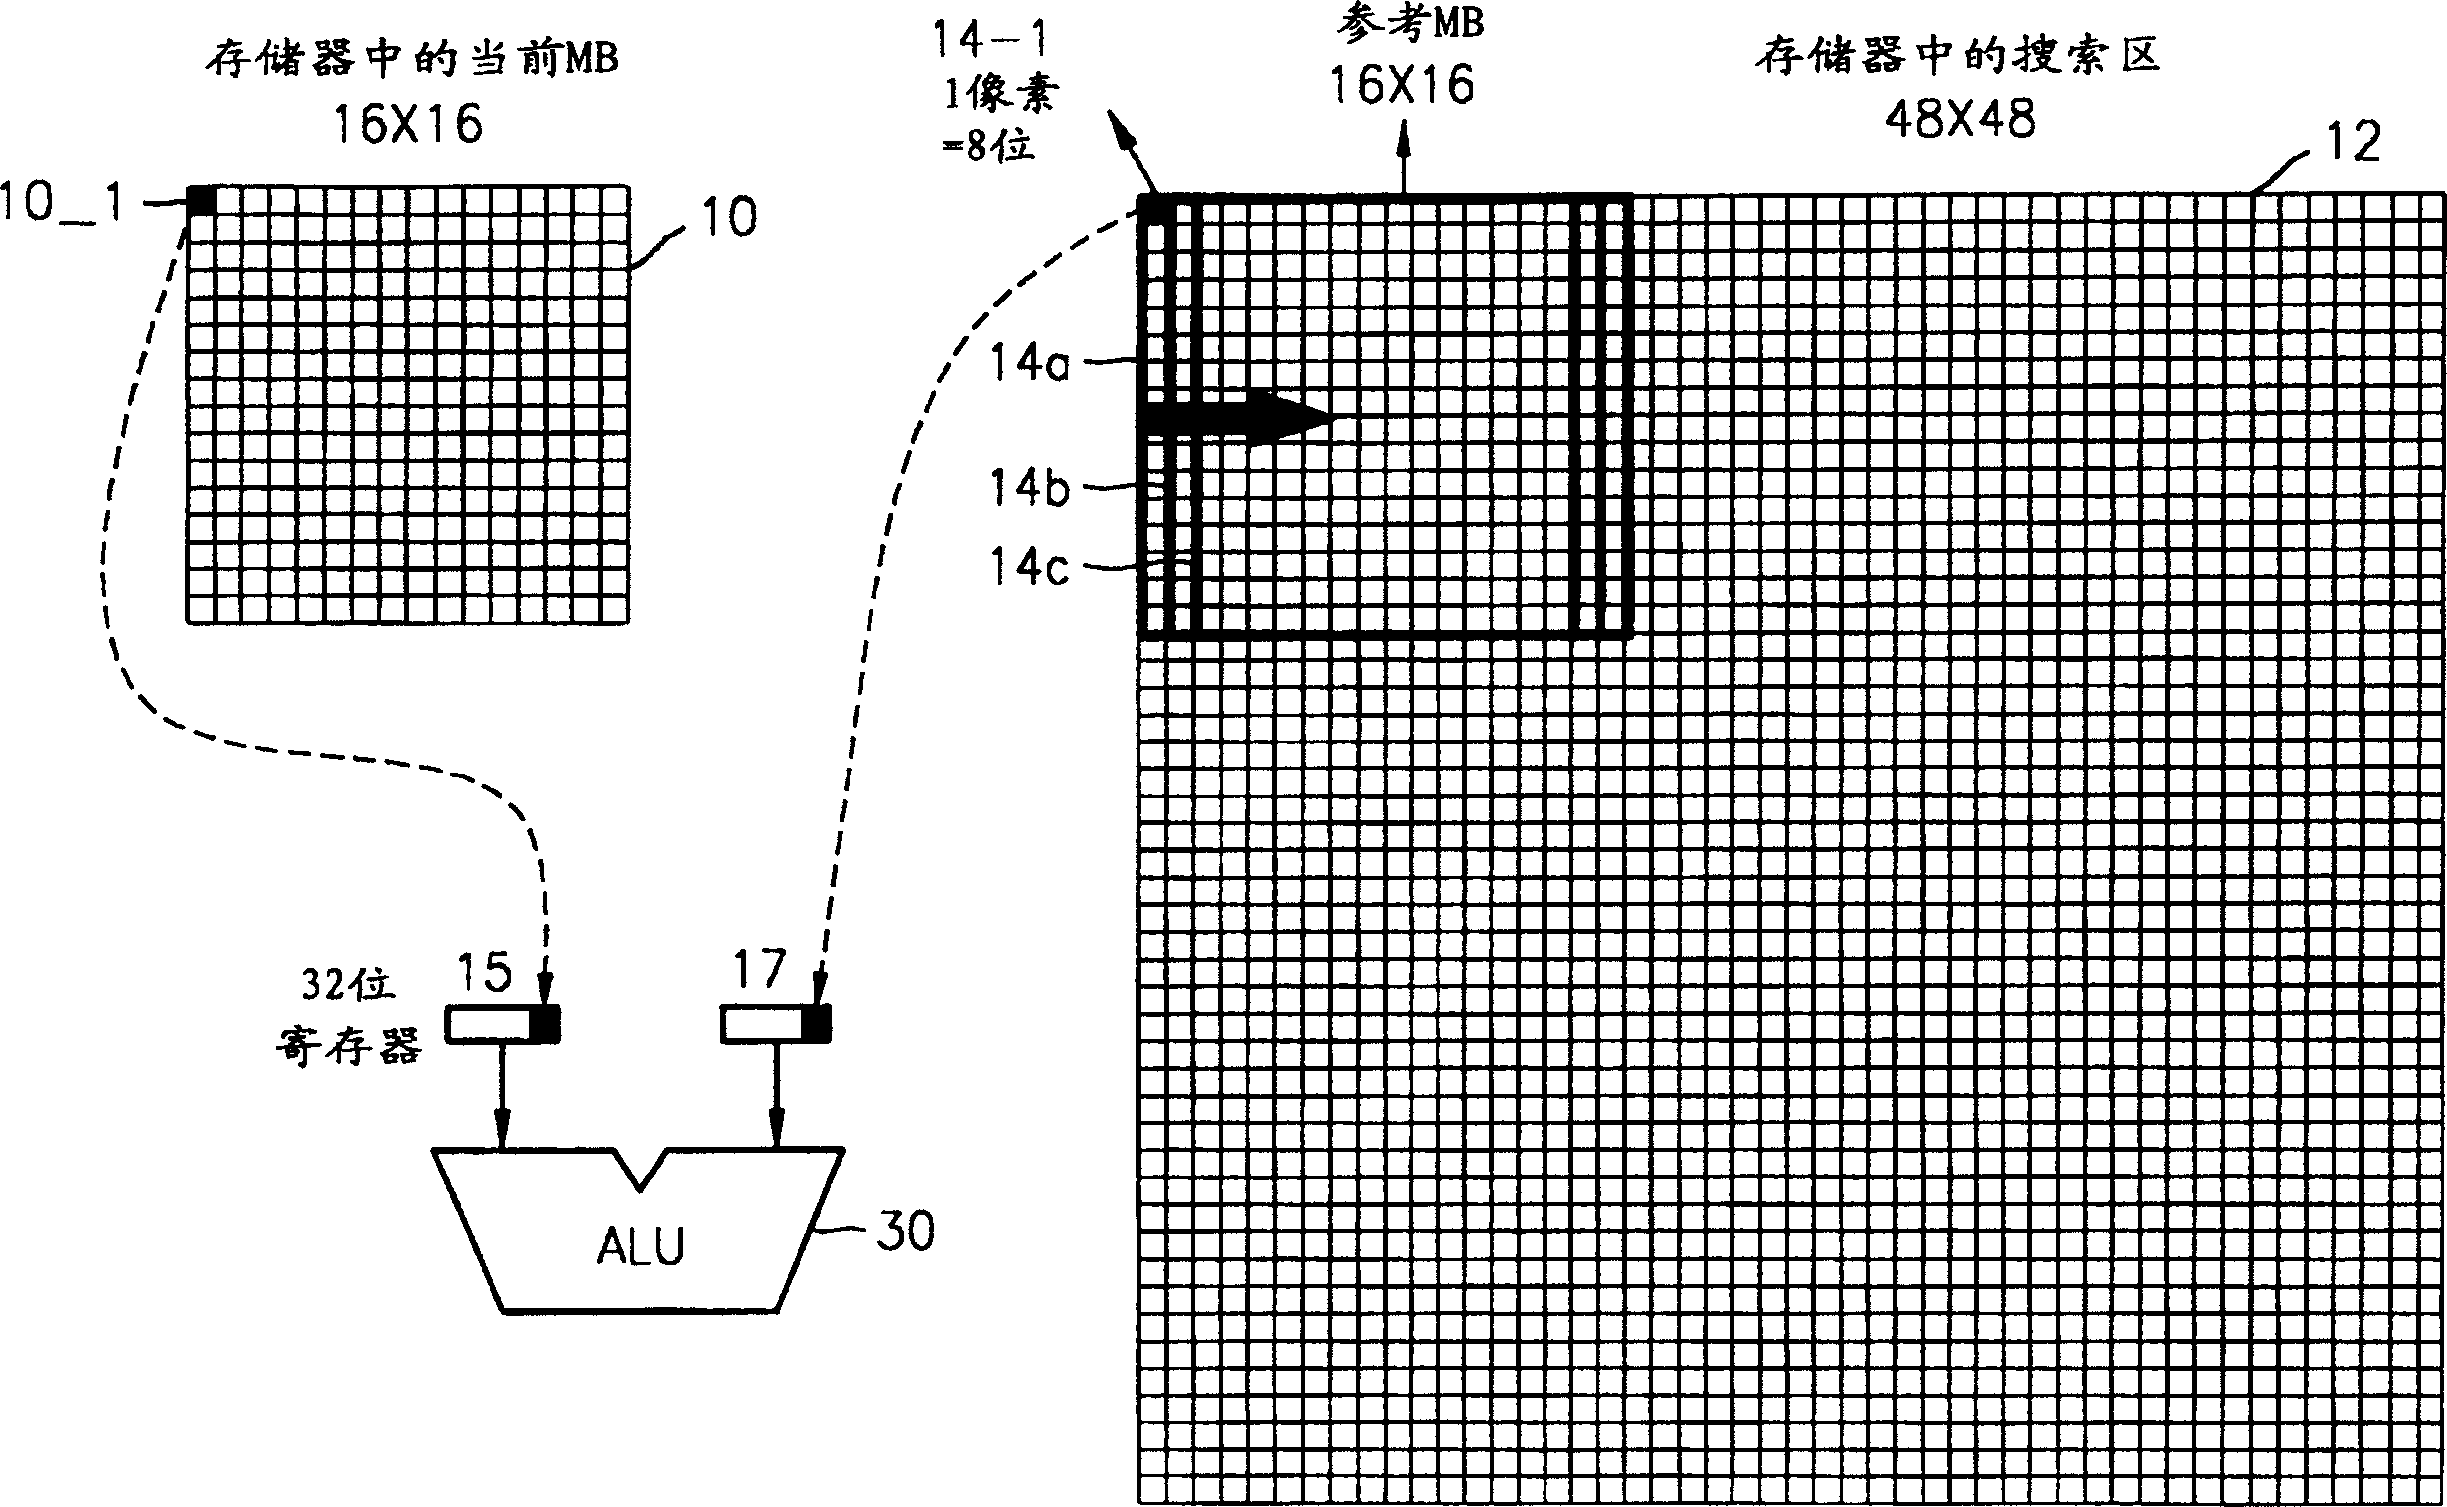 Moving estimating device and method for reference macro block window in scanning search area